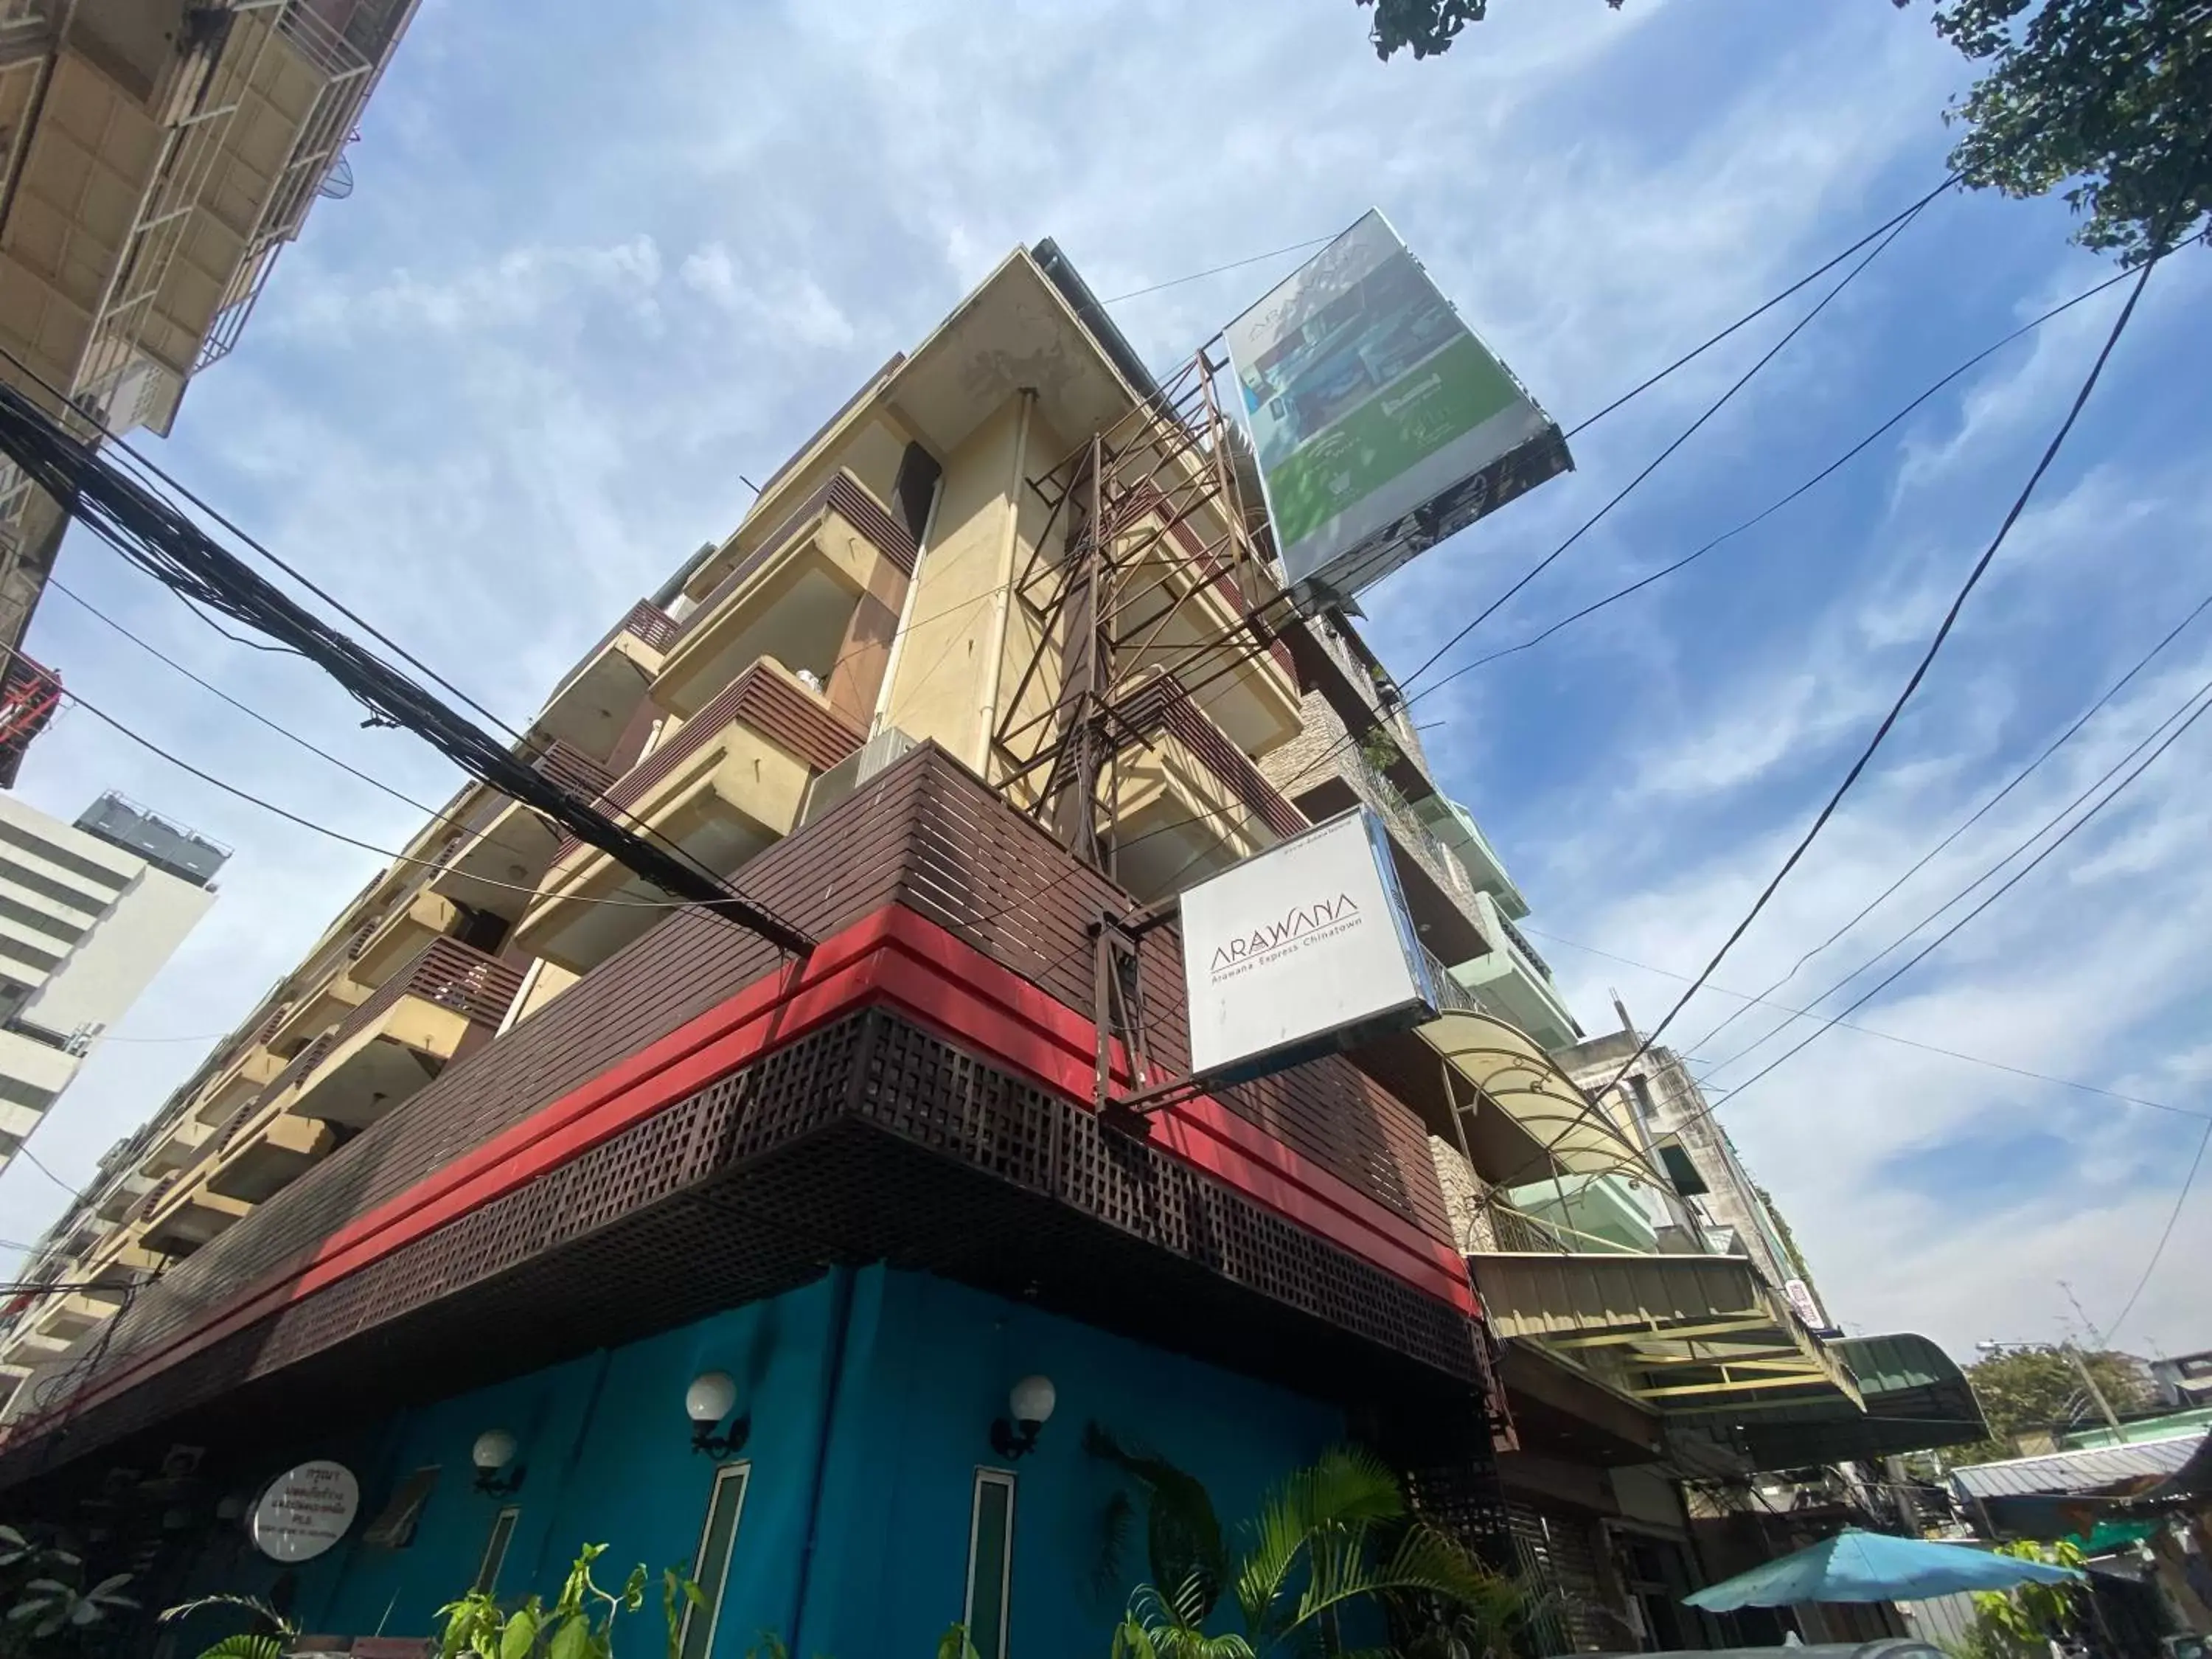 Property Building in Arawana Express Chinatown